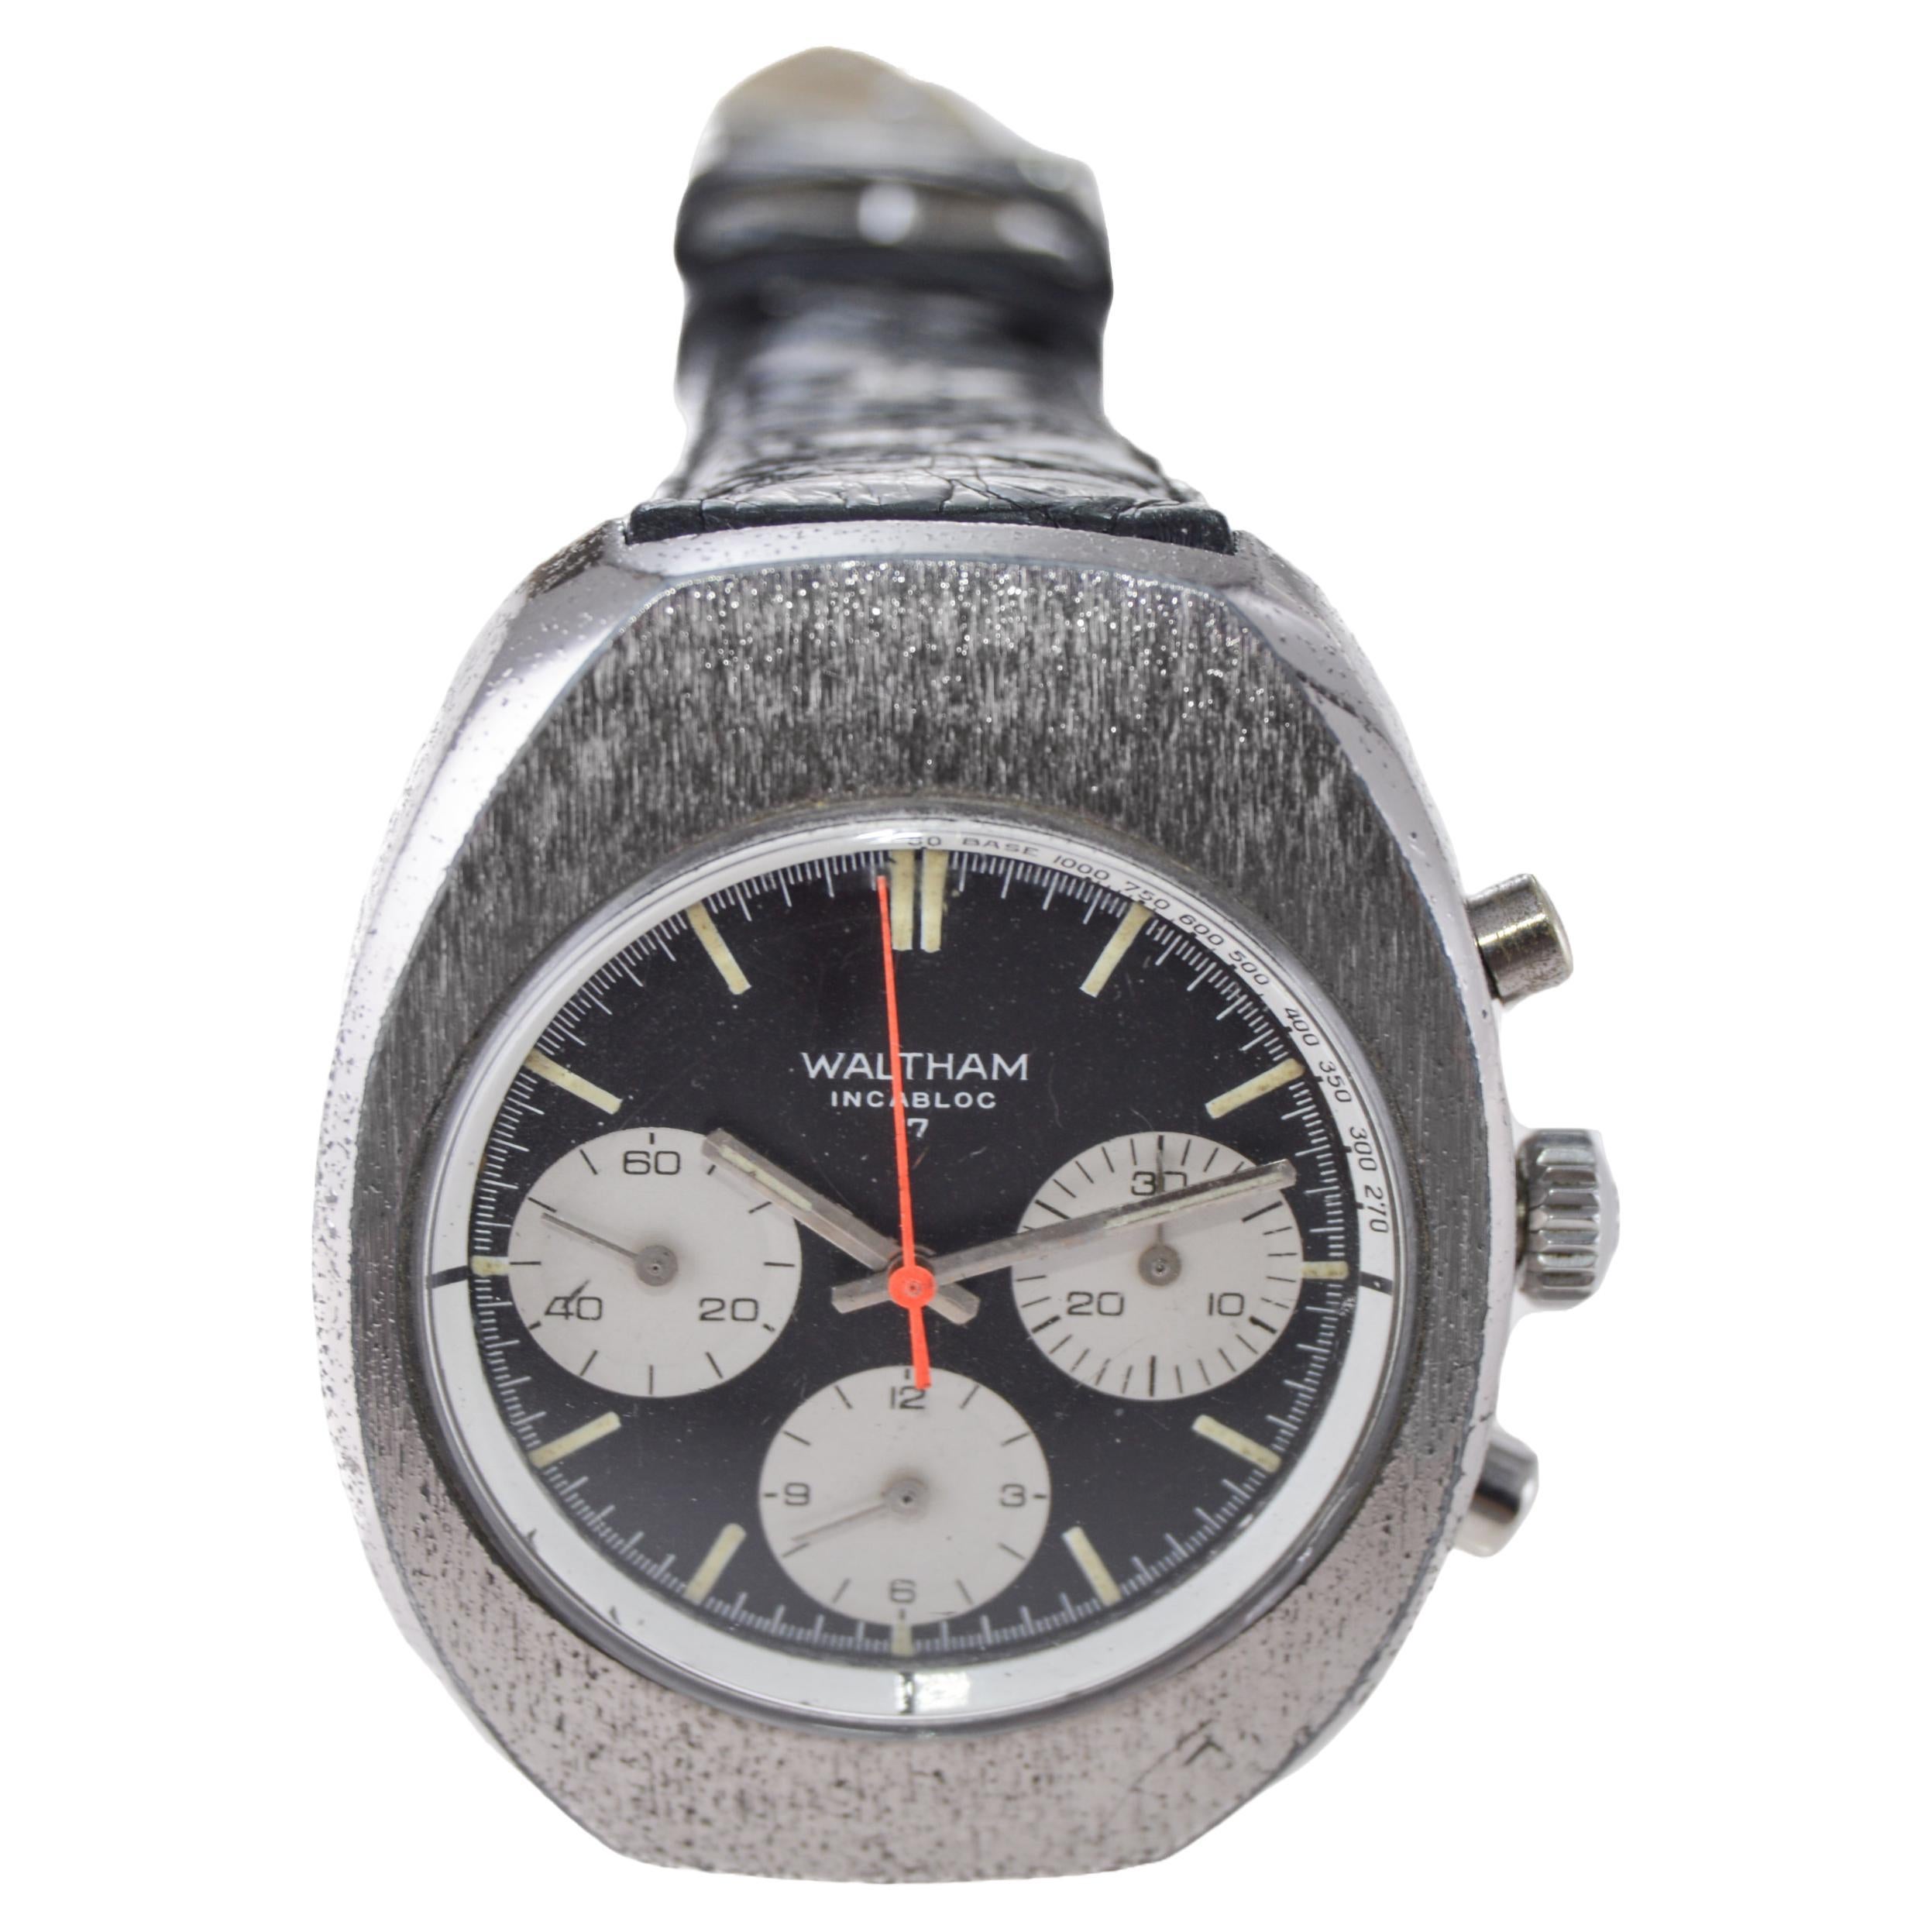 Waltham Chromium Tonneau Shaped Three Register Chronograph Manual Watch In Good Condition For Sale In Long Beach, CA